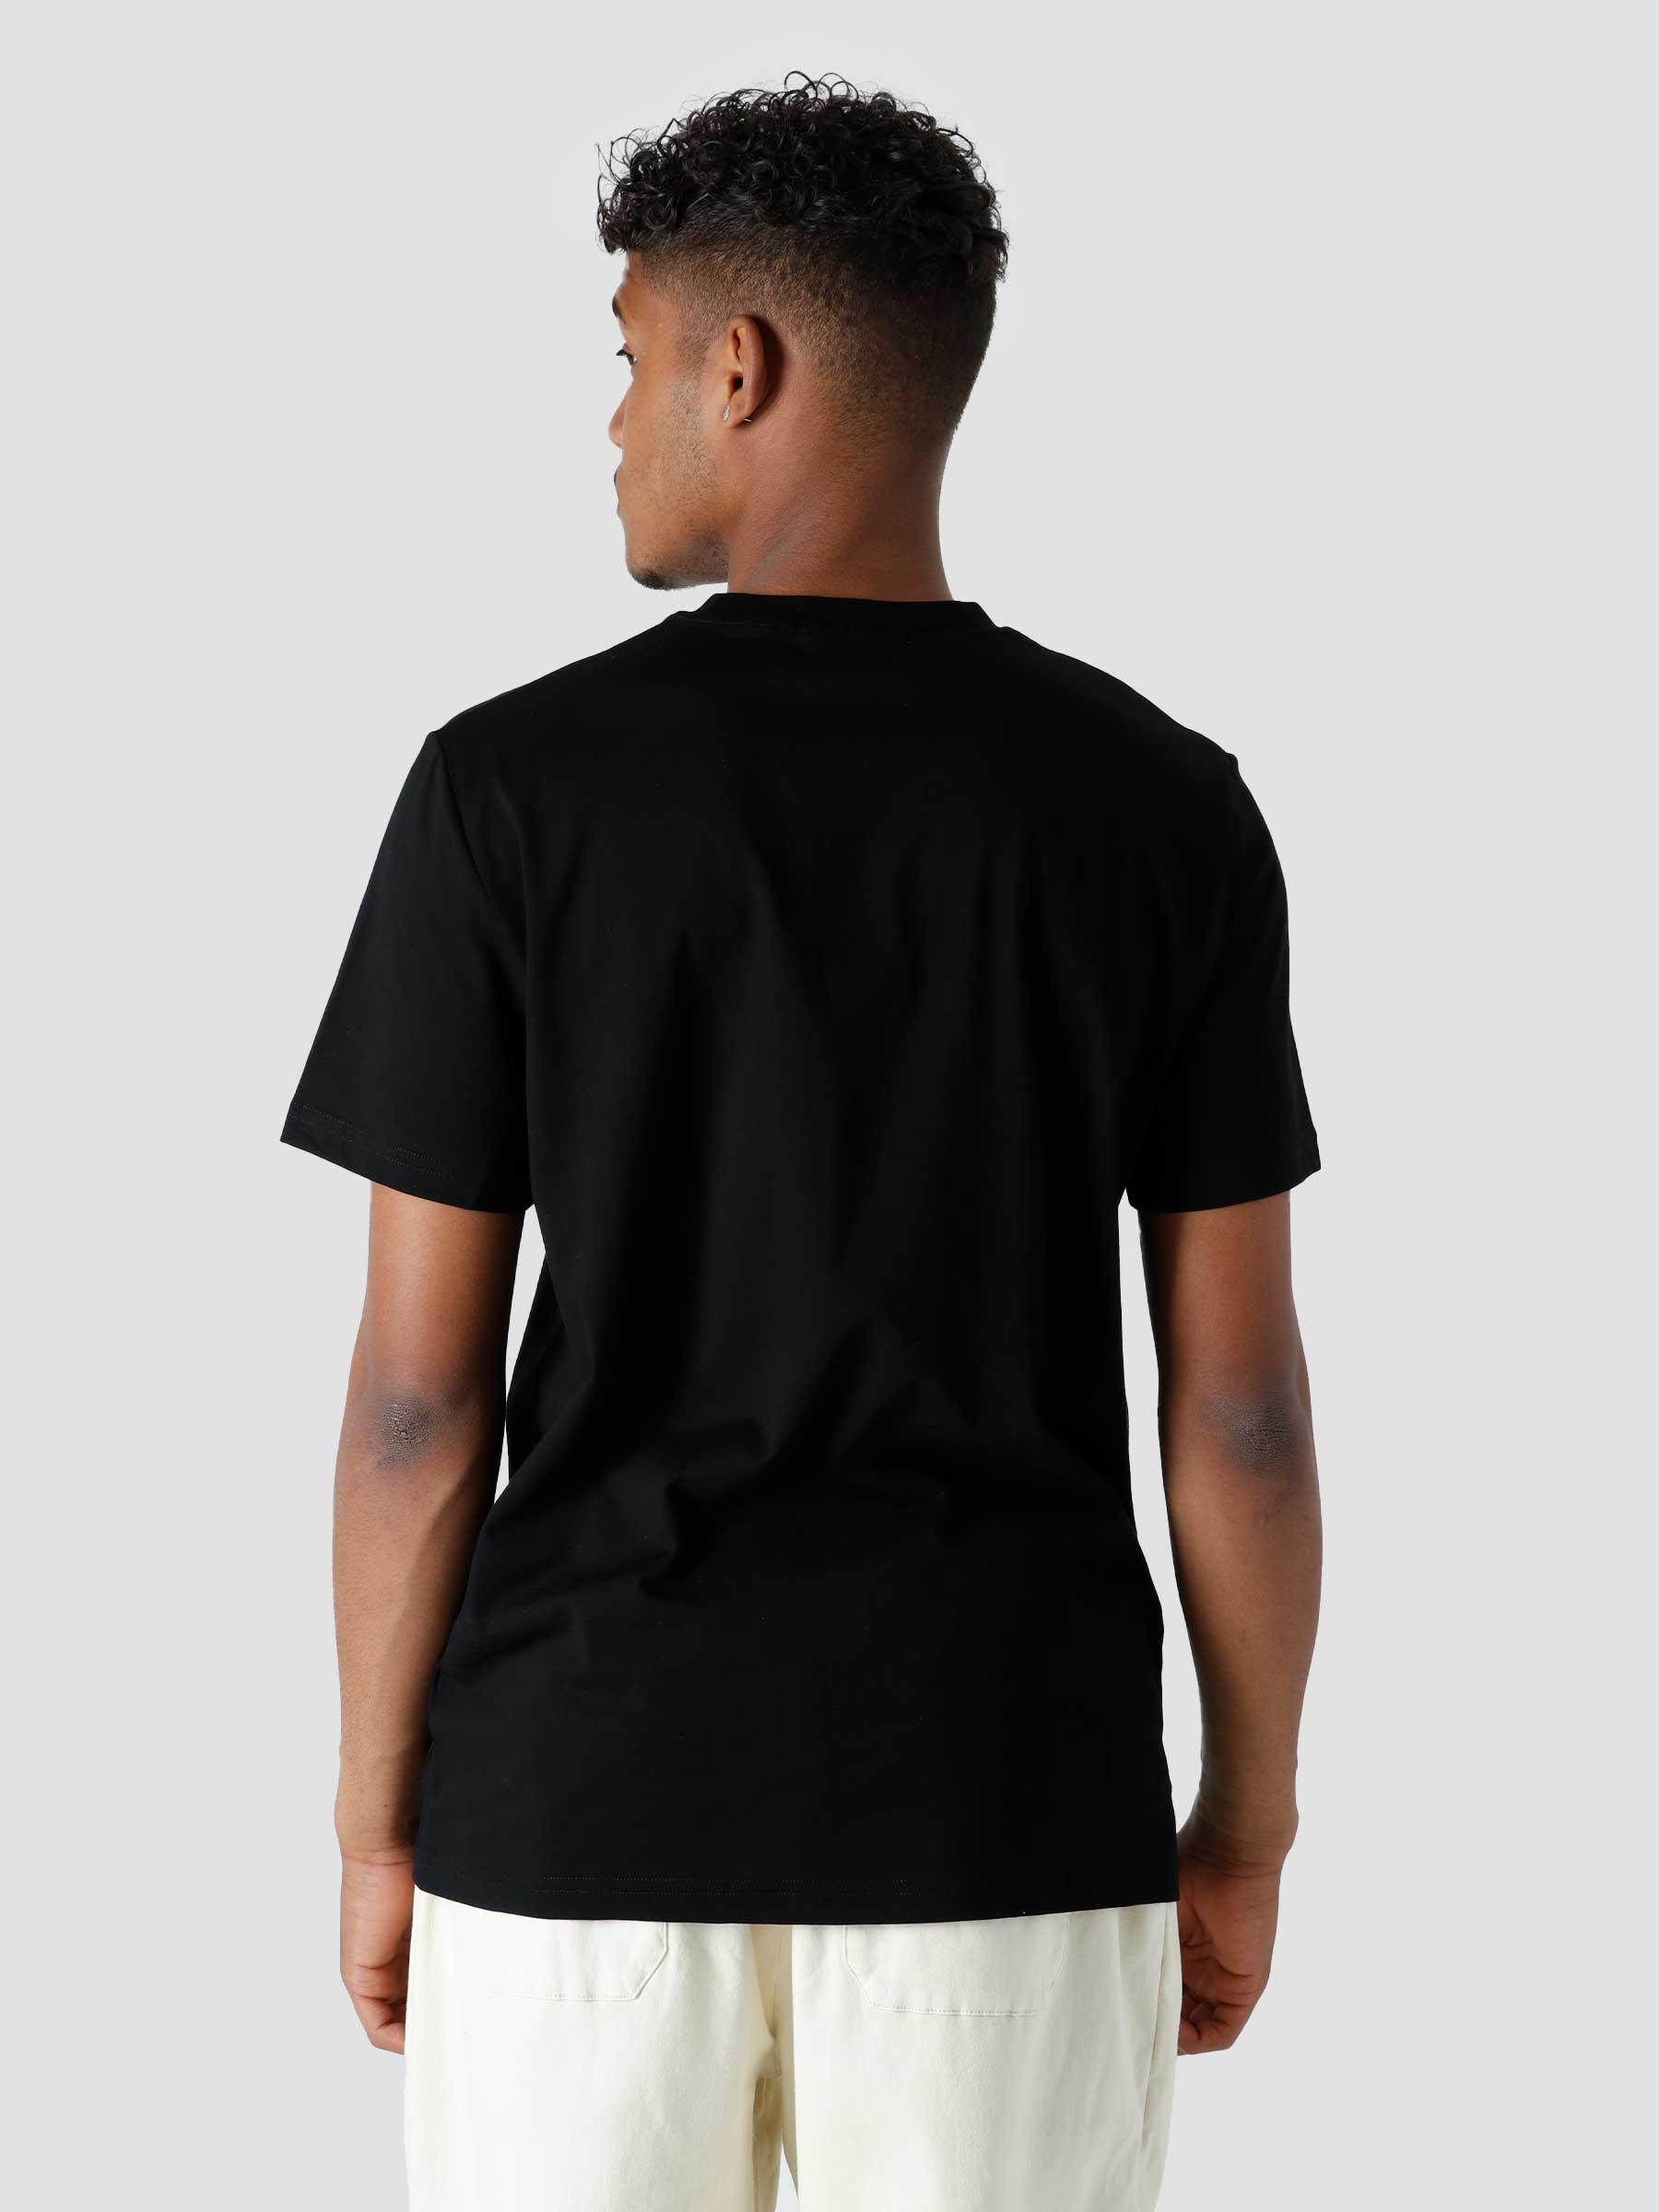 Embroidered T-Shirt Black M2706-102